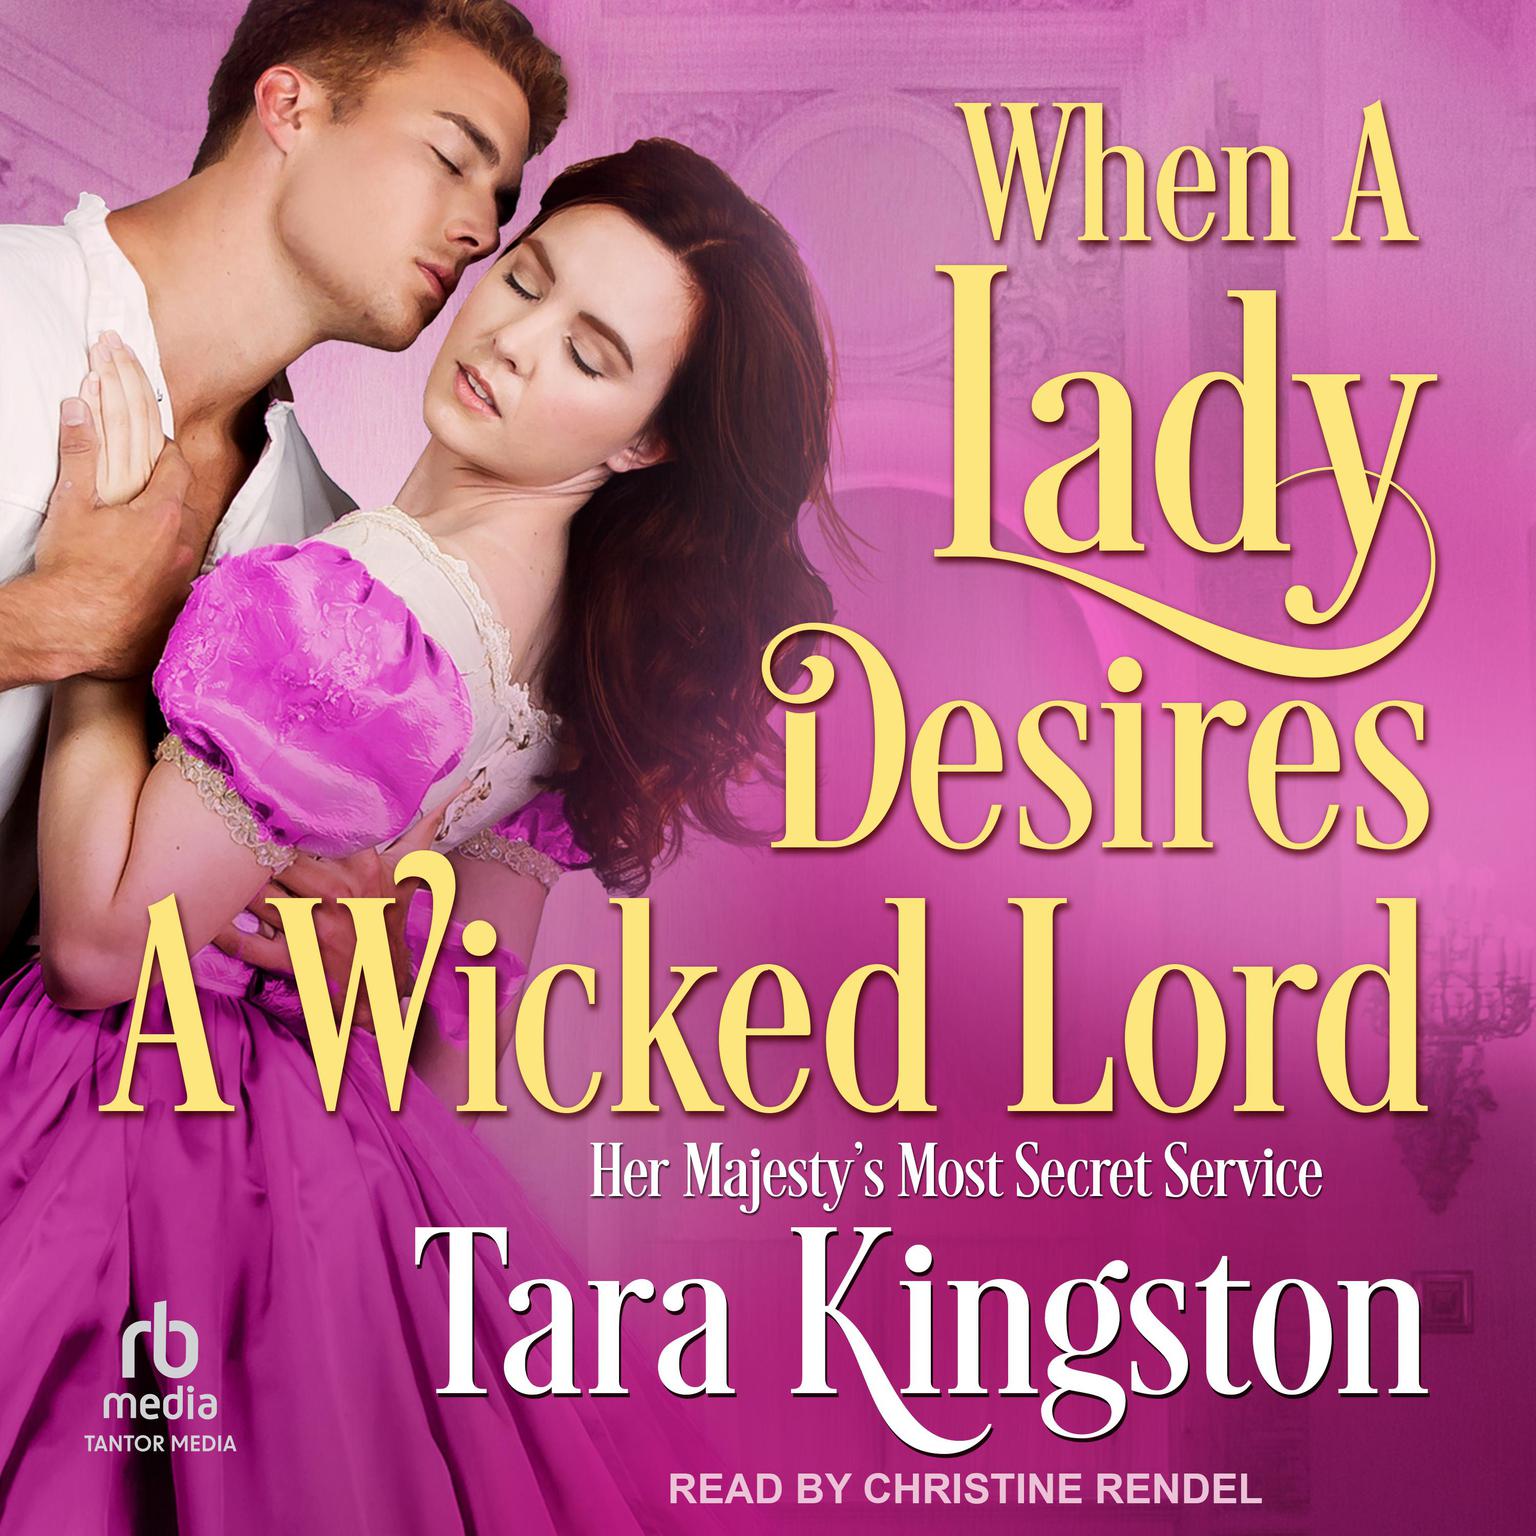 When a Lady Desires a Wicked Lord Audiobook, by Tara Kingston